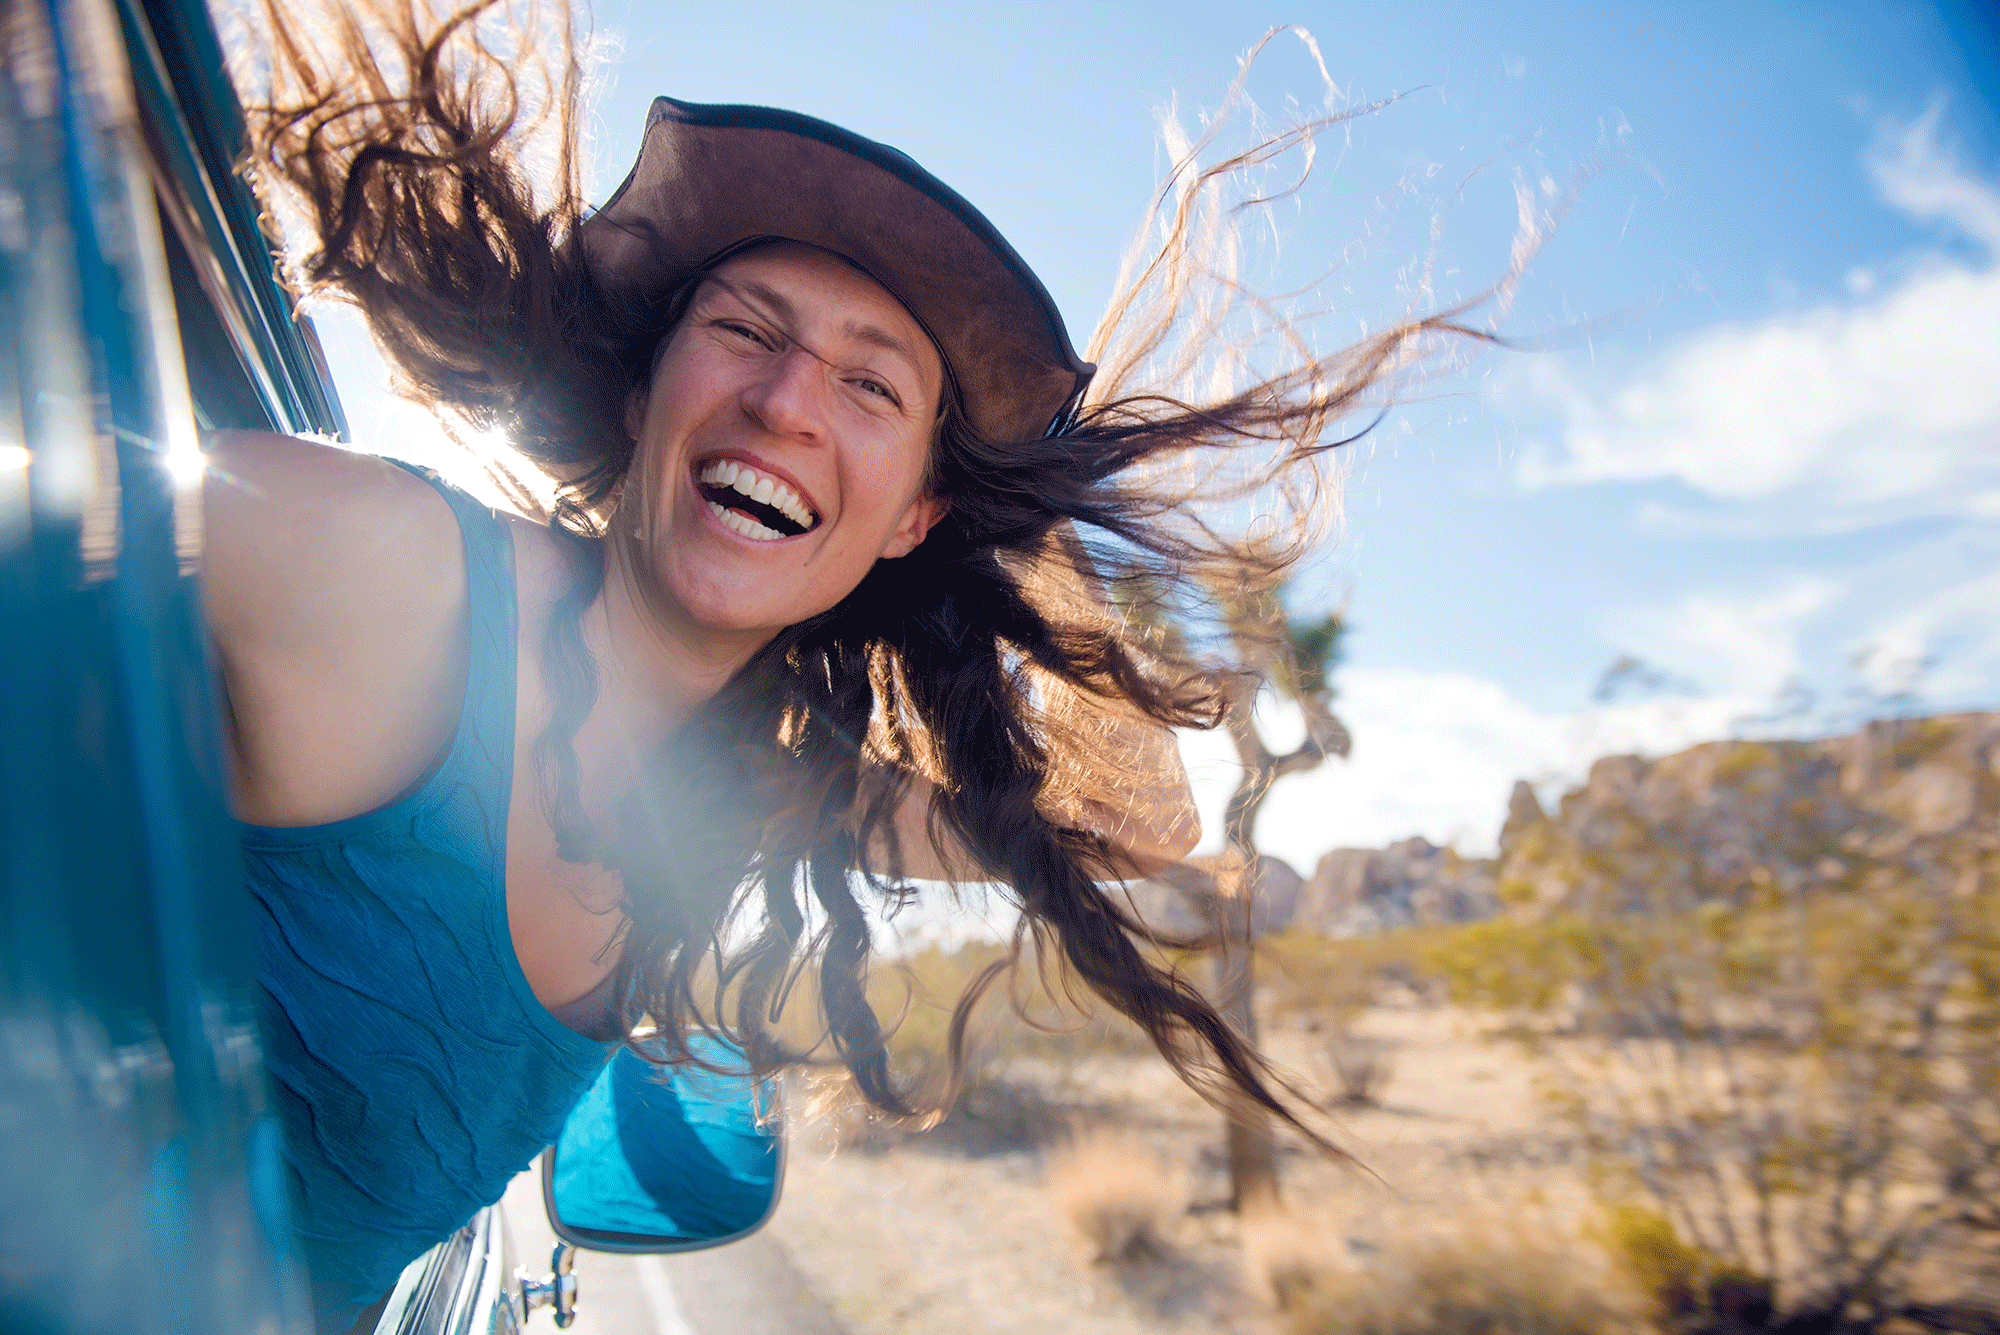 Photograph of Strong women hair flying out of window in Joshua Tree Ca